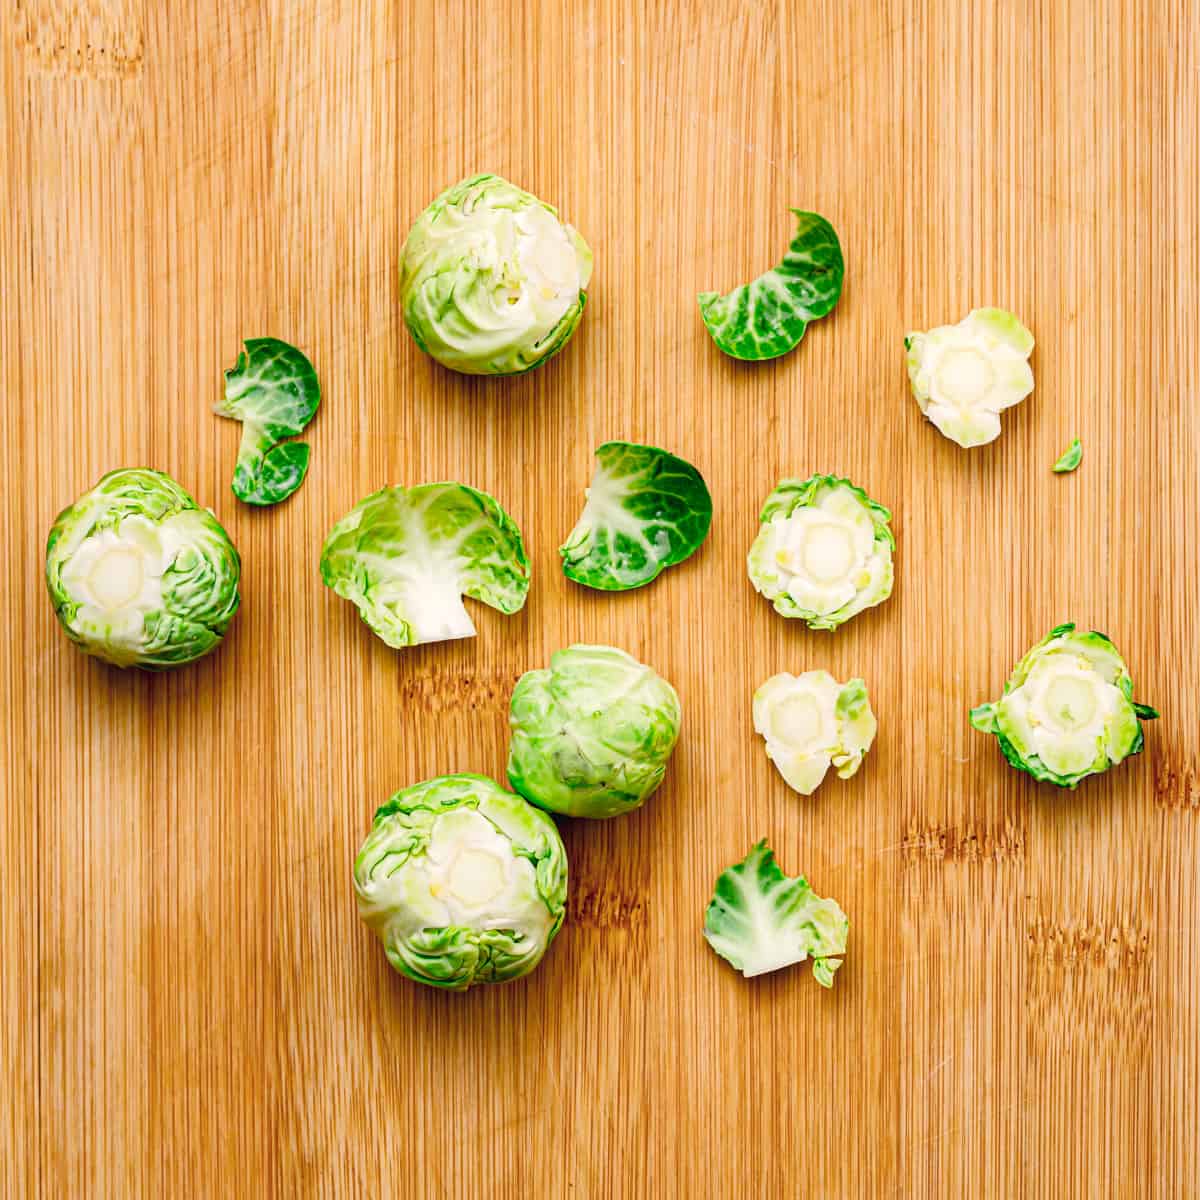 How to Trim Brussels Sprouts